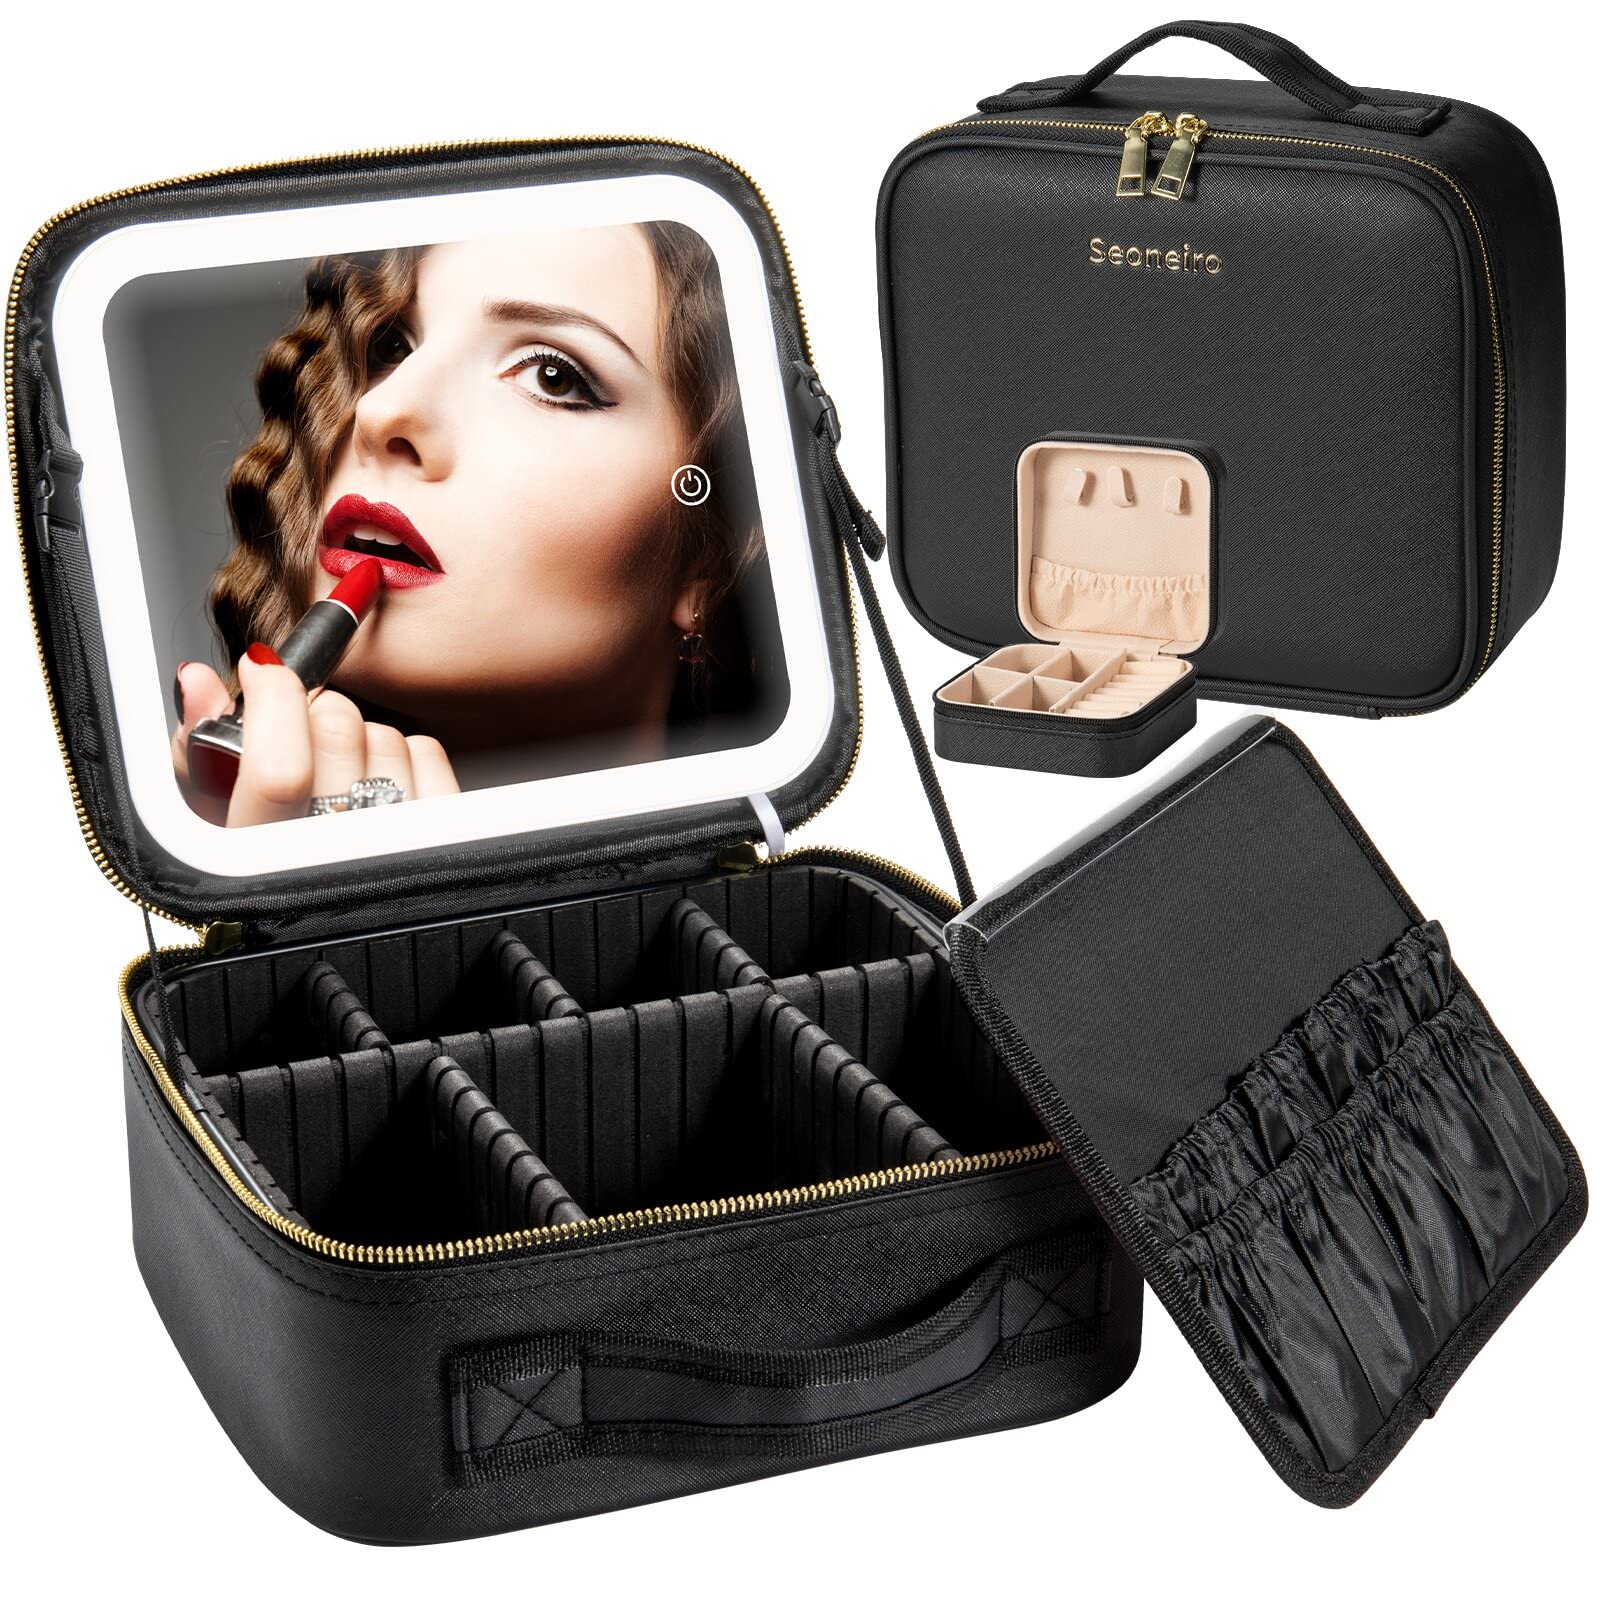 Makeup Travel Bag with LED Lighted Mirror Adjustable Brightness Portable Waterproof Makeup Case with Adjustable Dividers, Make up Train Case Organizer Makeup Brush Accessories and Tool Case (Black)